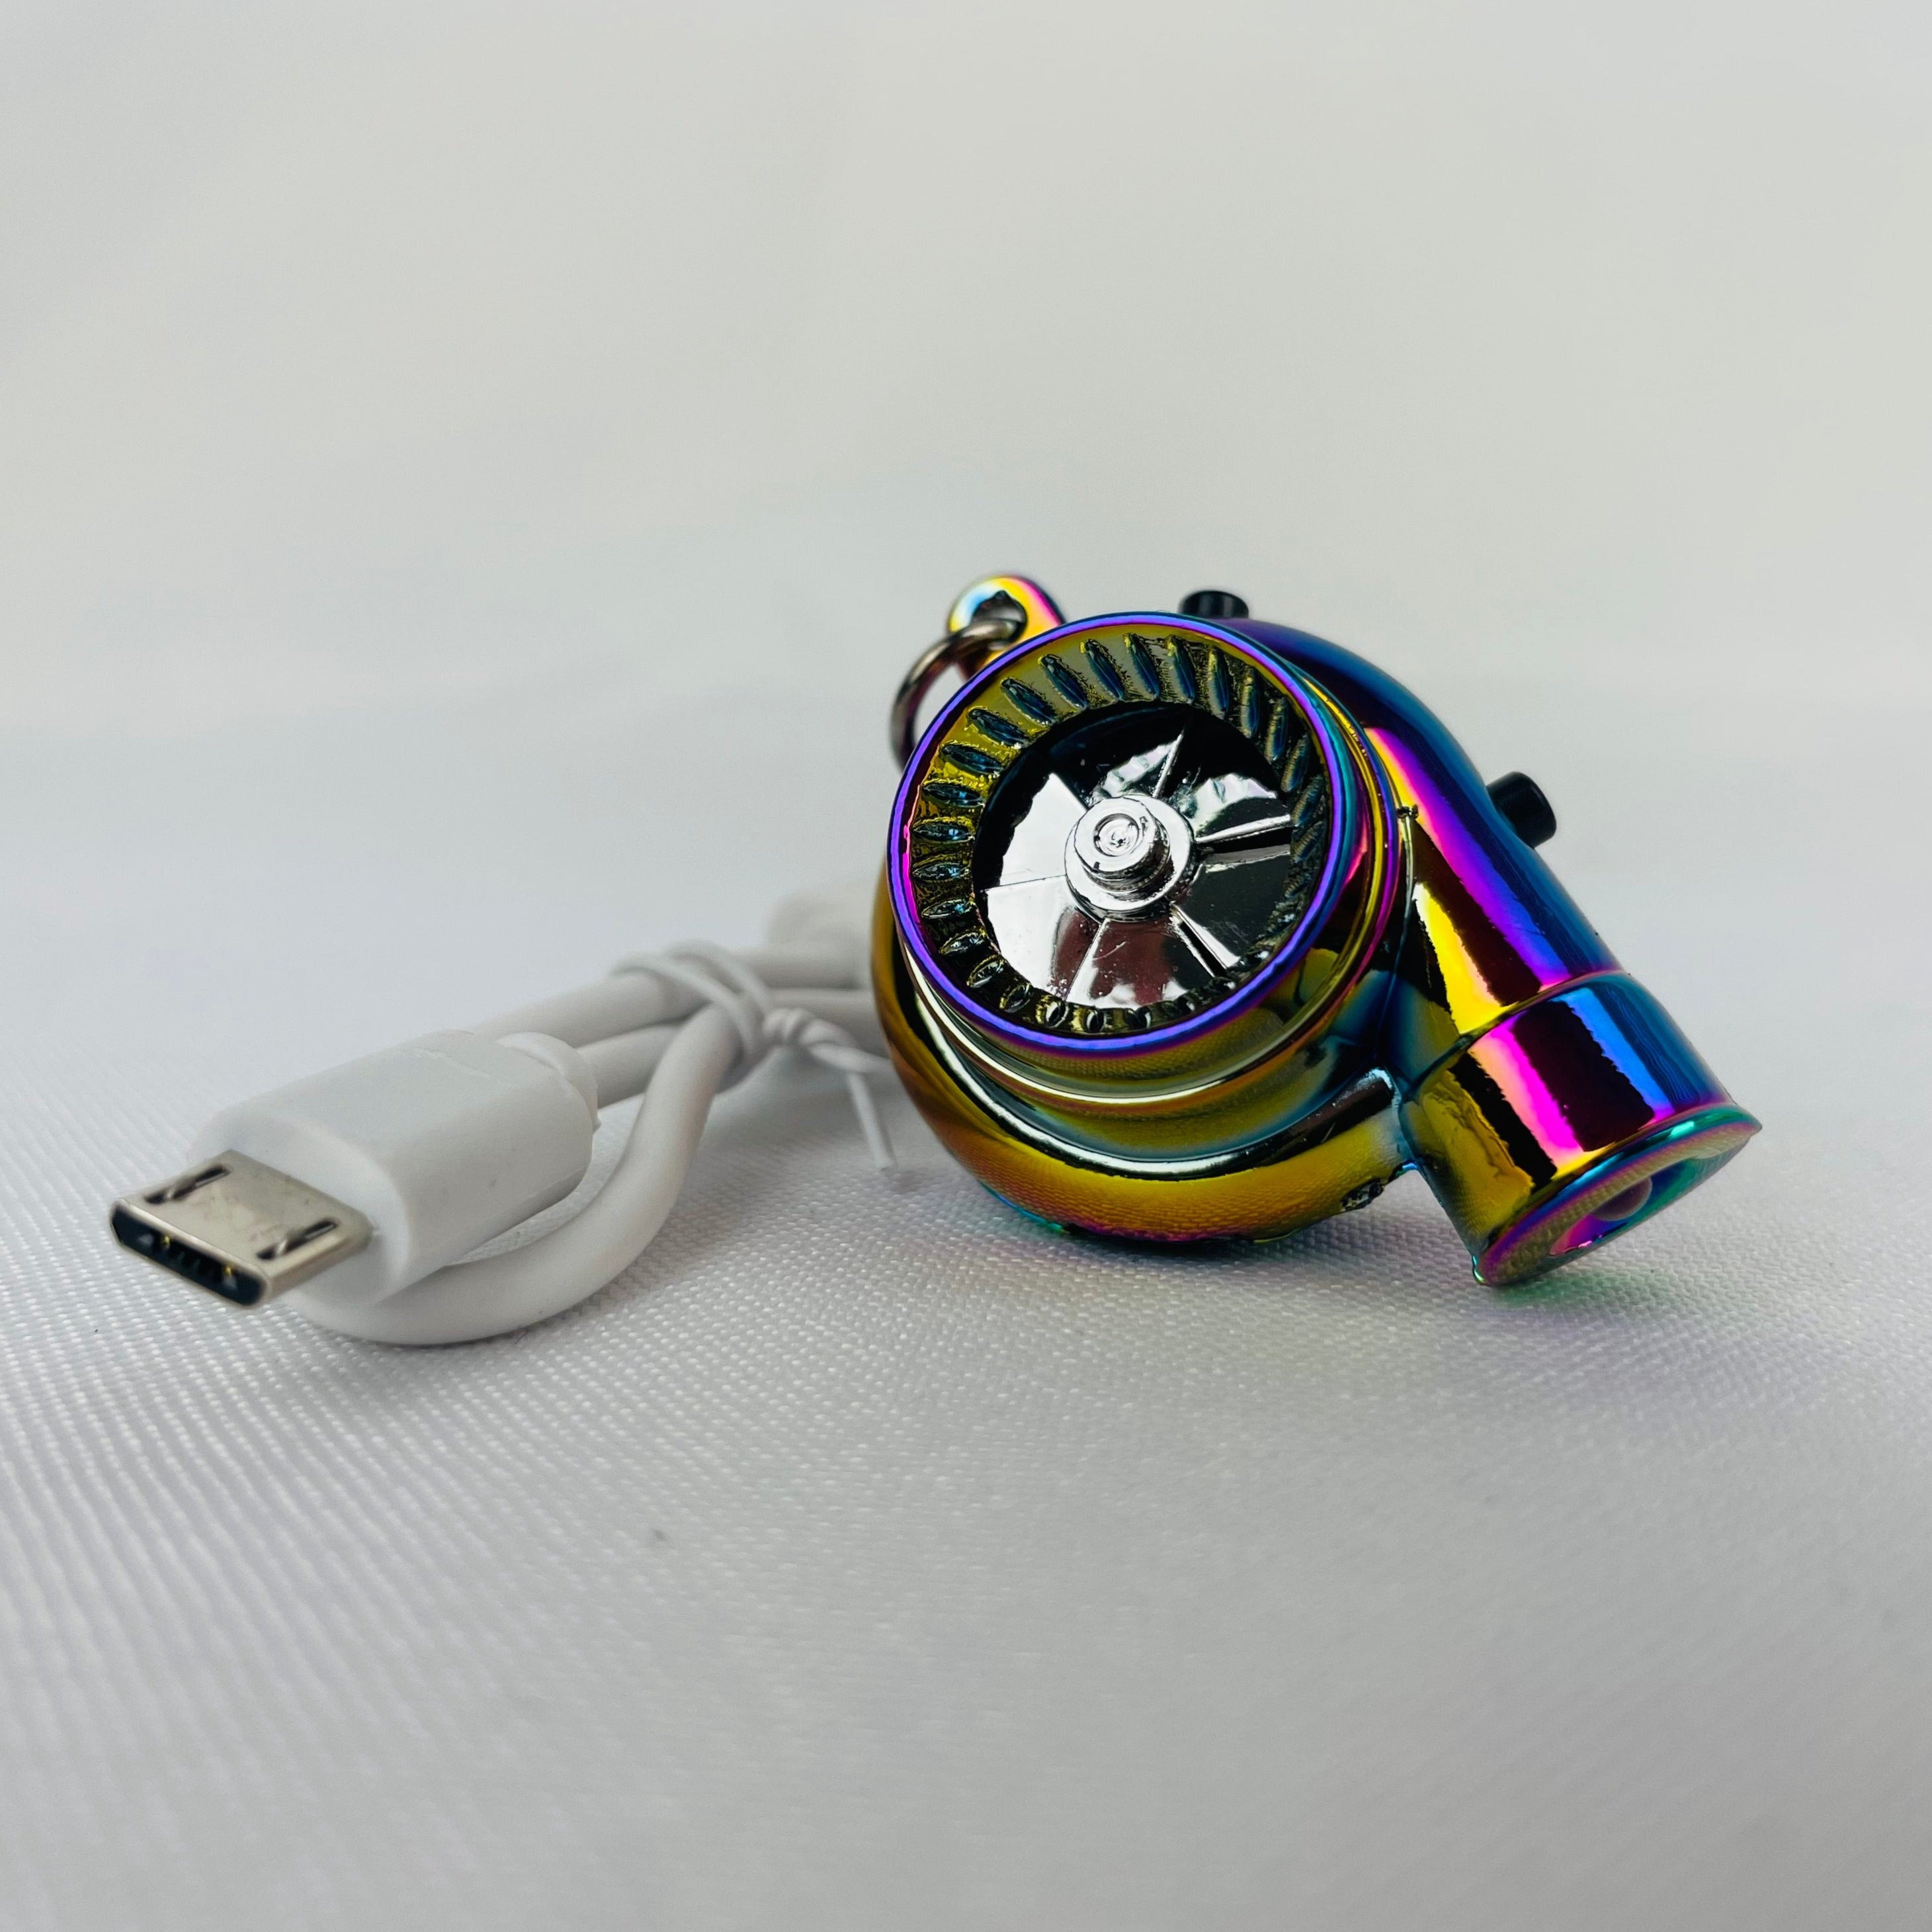 Spinning turbo LED turbo keychain (rechargeable)